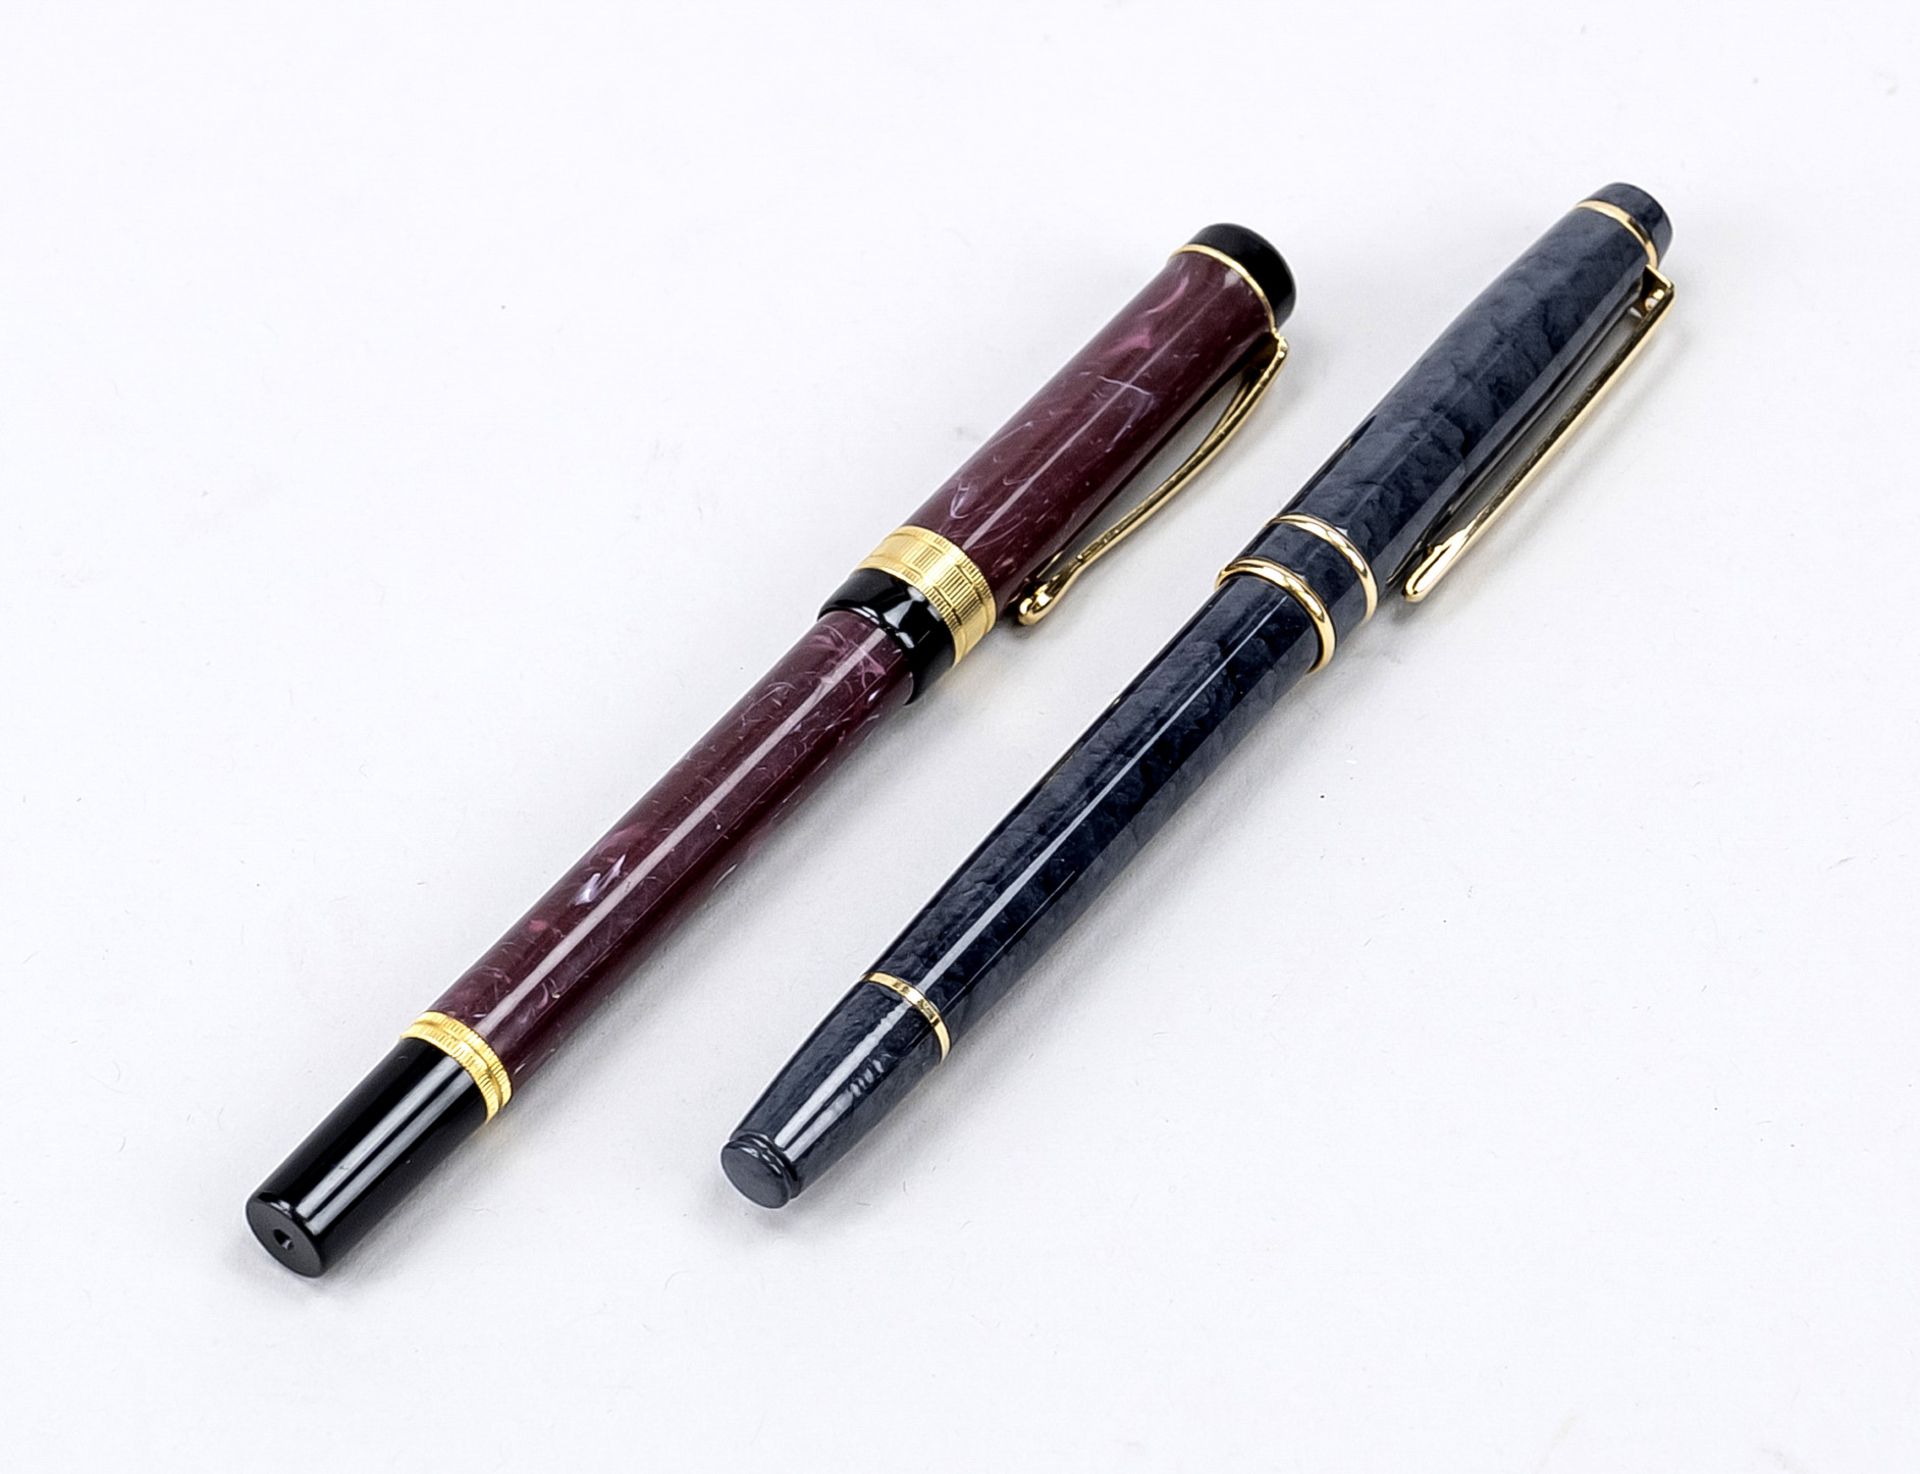 2 fountain pens, Germany 2nd half 20th century, nibs ''Iridium'', for ink cartridges, l. to 13.5 cm